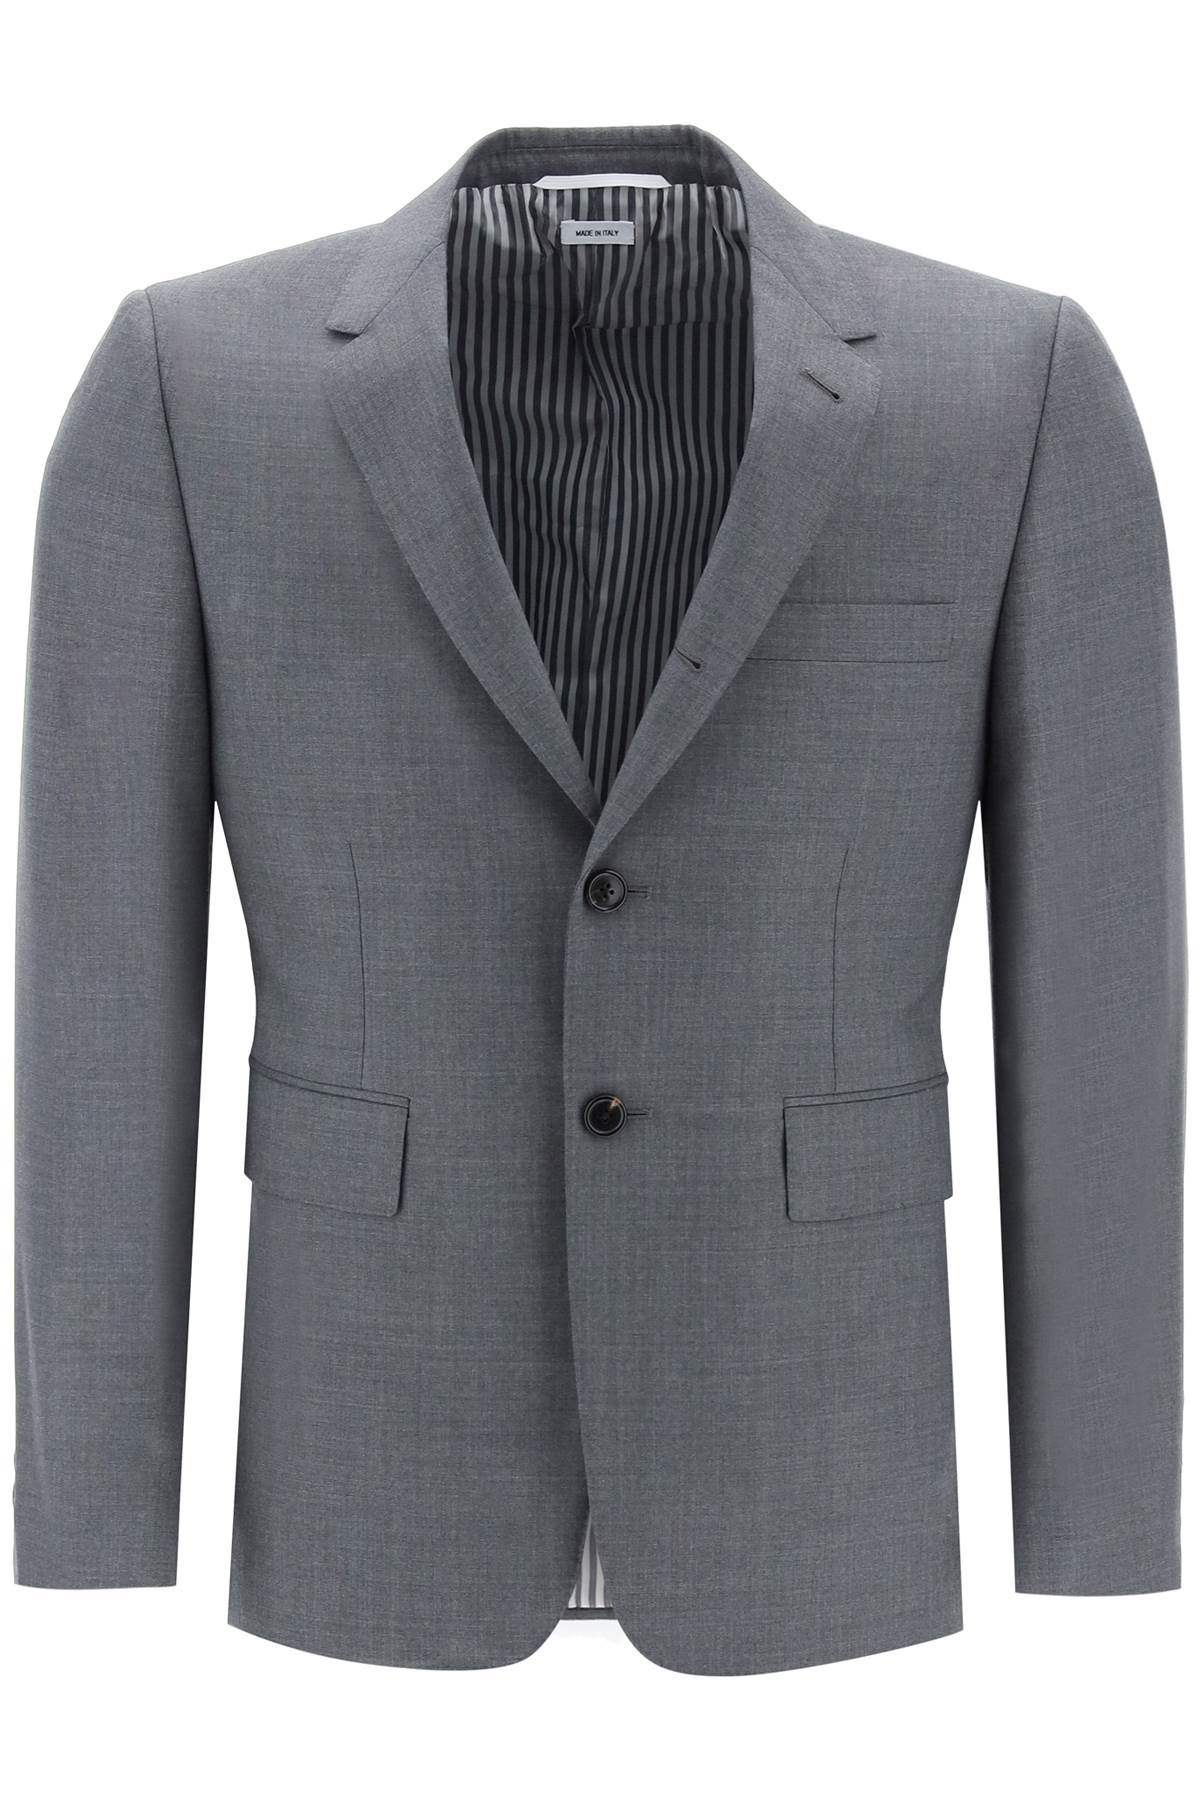 Thom Browne Classic Sport Coat Jacket In Gray